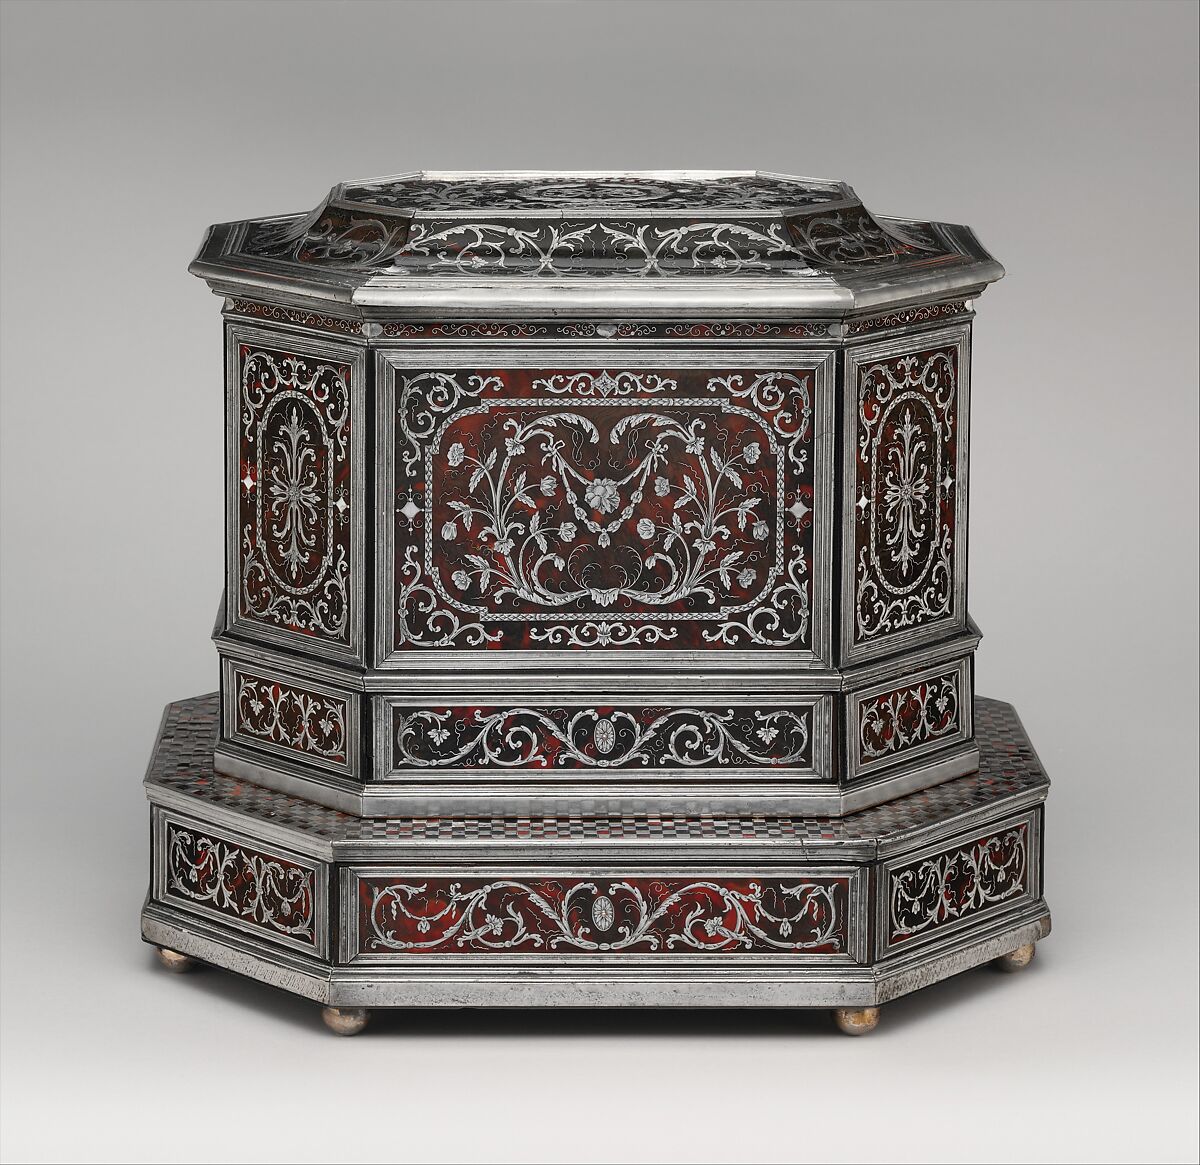 Wig cabinet (cabinet de coiffure), Johann Daniel Sommer II (German, 1643–1698?), Oak and walnut veneered with ebony, ebonized wood, and marquetry of pewter and mother-of-pearl on horn over paint, simulating tortoiseshell; silver; brocaded damask (not original), German, Künzelzau 